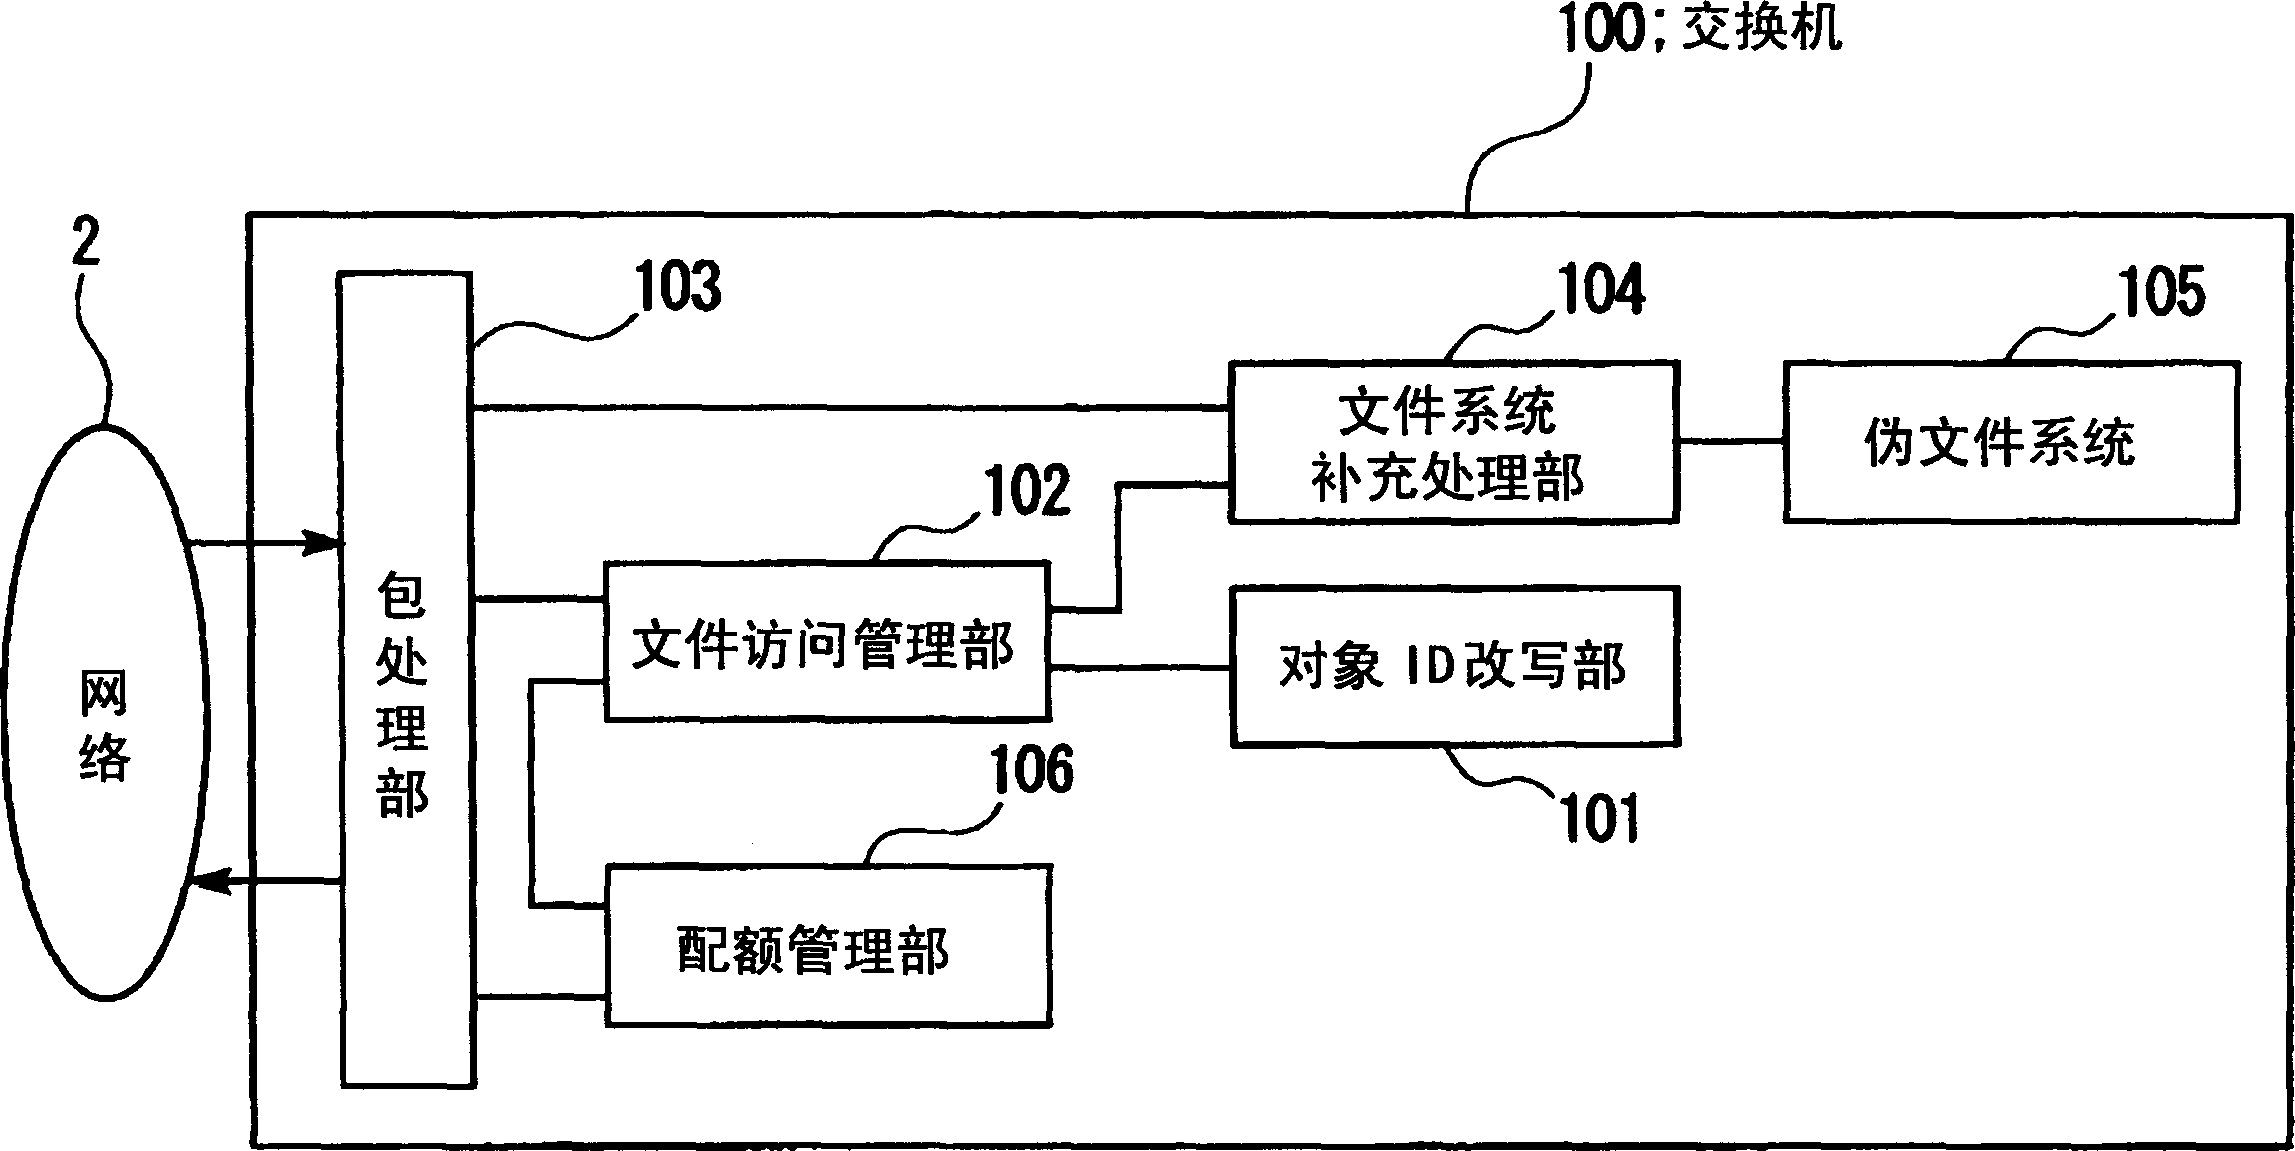 File access service system, switch apparatus, quota management method and program